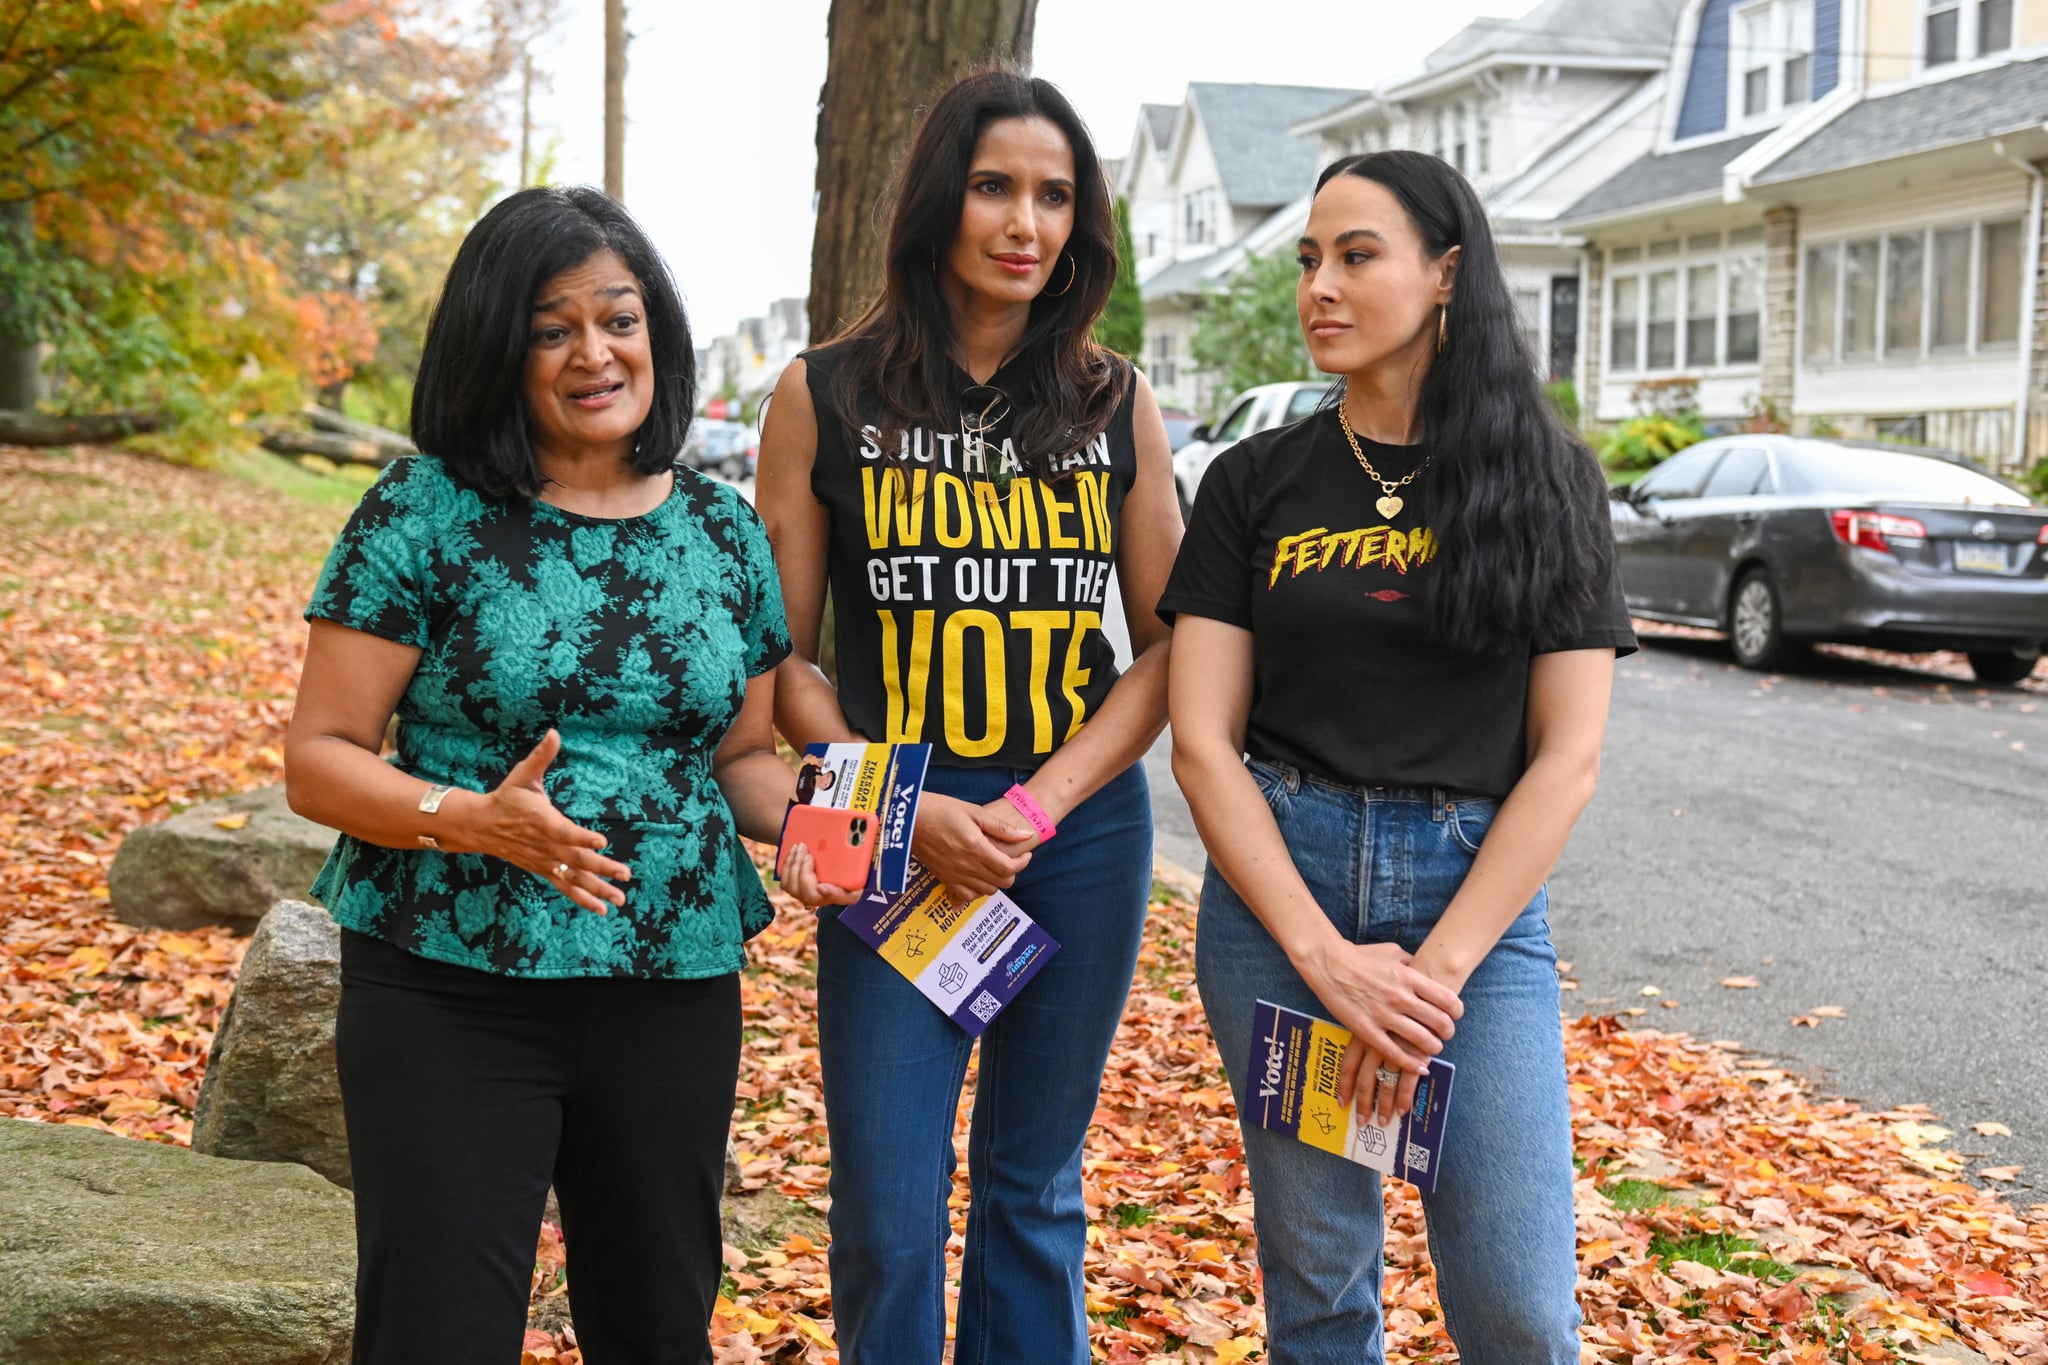 PHILADELPHIA, PENNSYLVANIA - NOVEMBER 06: Pramila Jayapal, Padma Lakshmi and Meena Harris attend the South Asian Women Get Out the Vote Canvass Event on November 06, 2022 in Philadelphia, Pennsylvania. (Photo by Daniel Zuchnik/Getty Images for Indian American Impact)